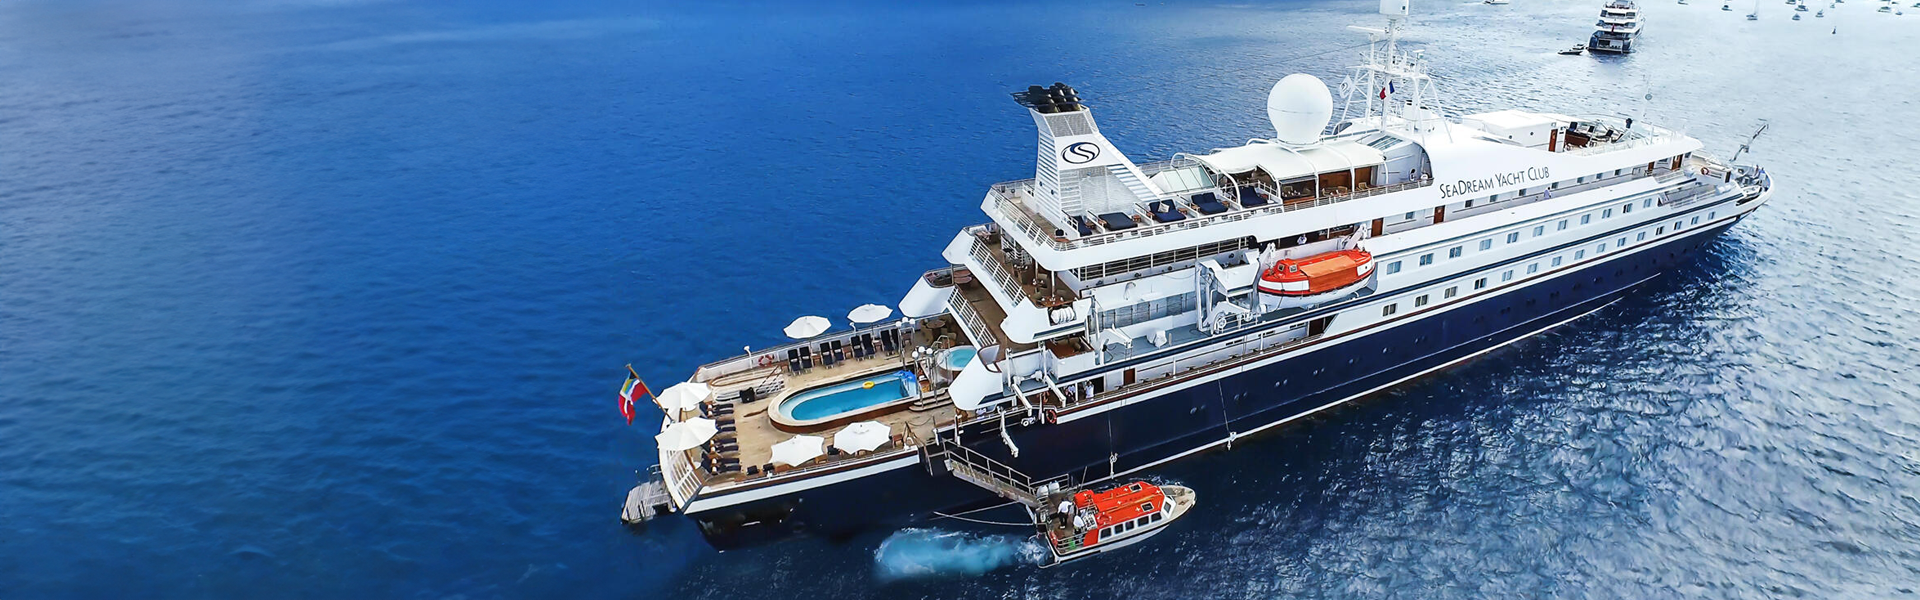 Set Sail with Seadream Yacht Club for an exclusive Cruise to the Mediterranean Sea 